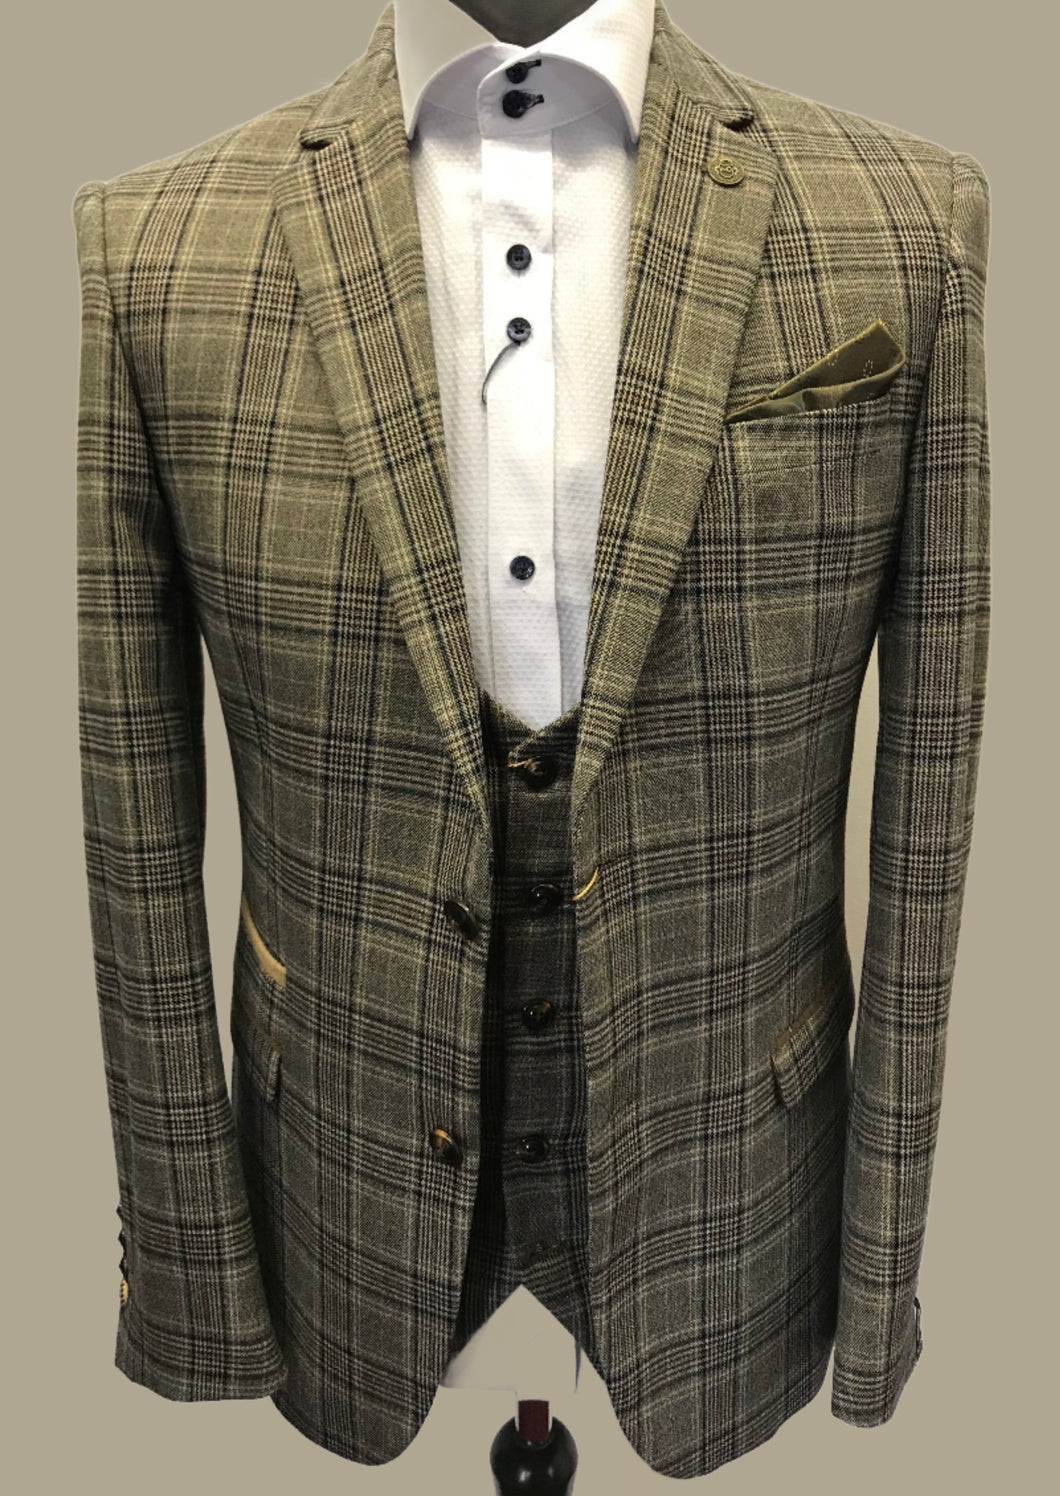 Marc Darcy Enzo Checked Jacket styled with a matching waistcoat and textuerd white shirt